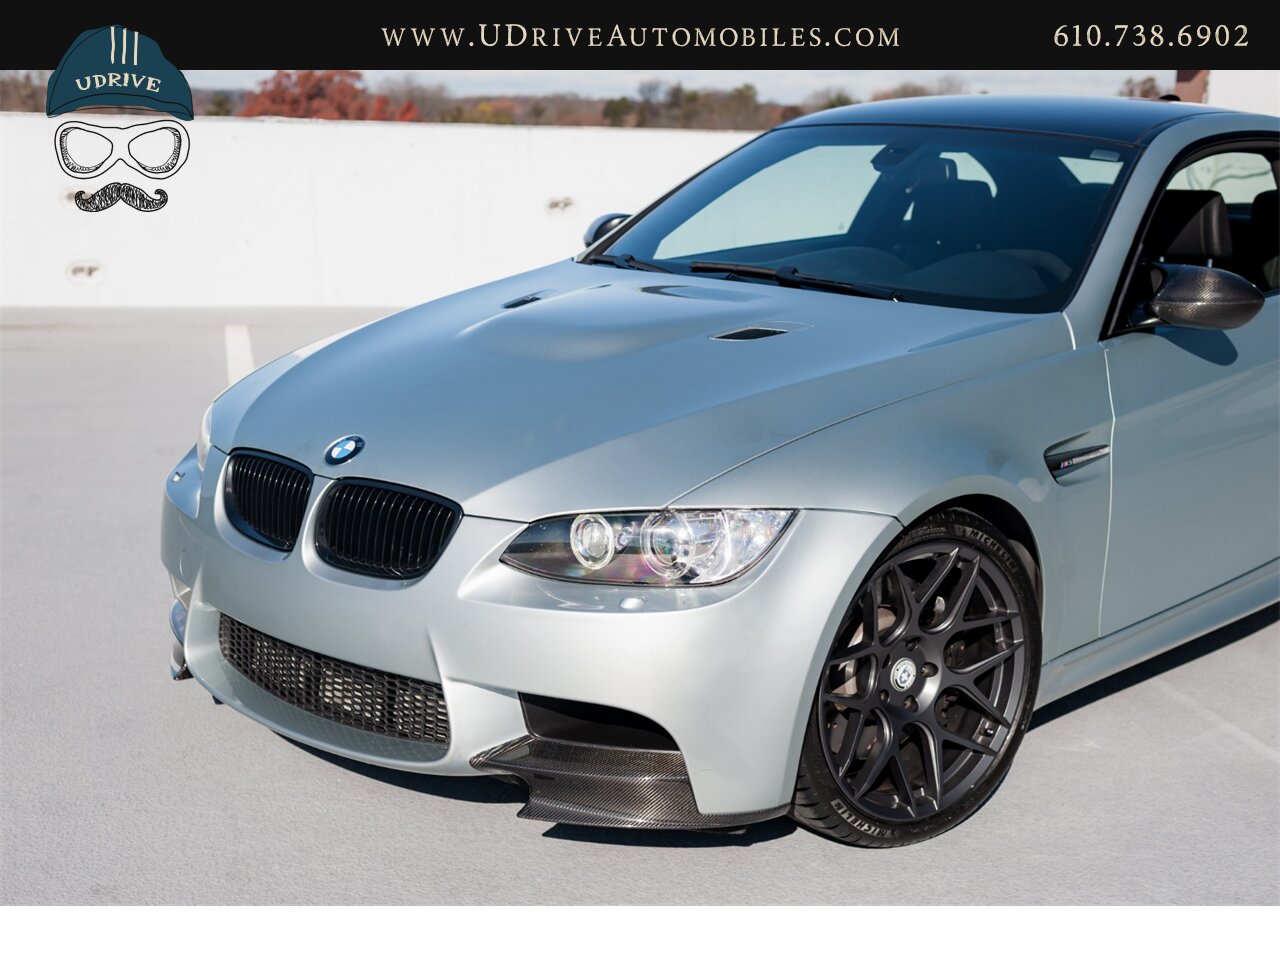 2008 BMW M3 Dinan S3-R M3 1 of 36 Produced DCT  1 Owner Full Service History 4.6L Stroker V8 - Photo 9 - West Chester, PA 19382